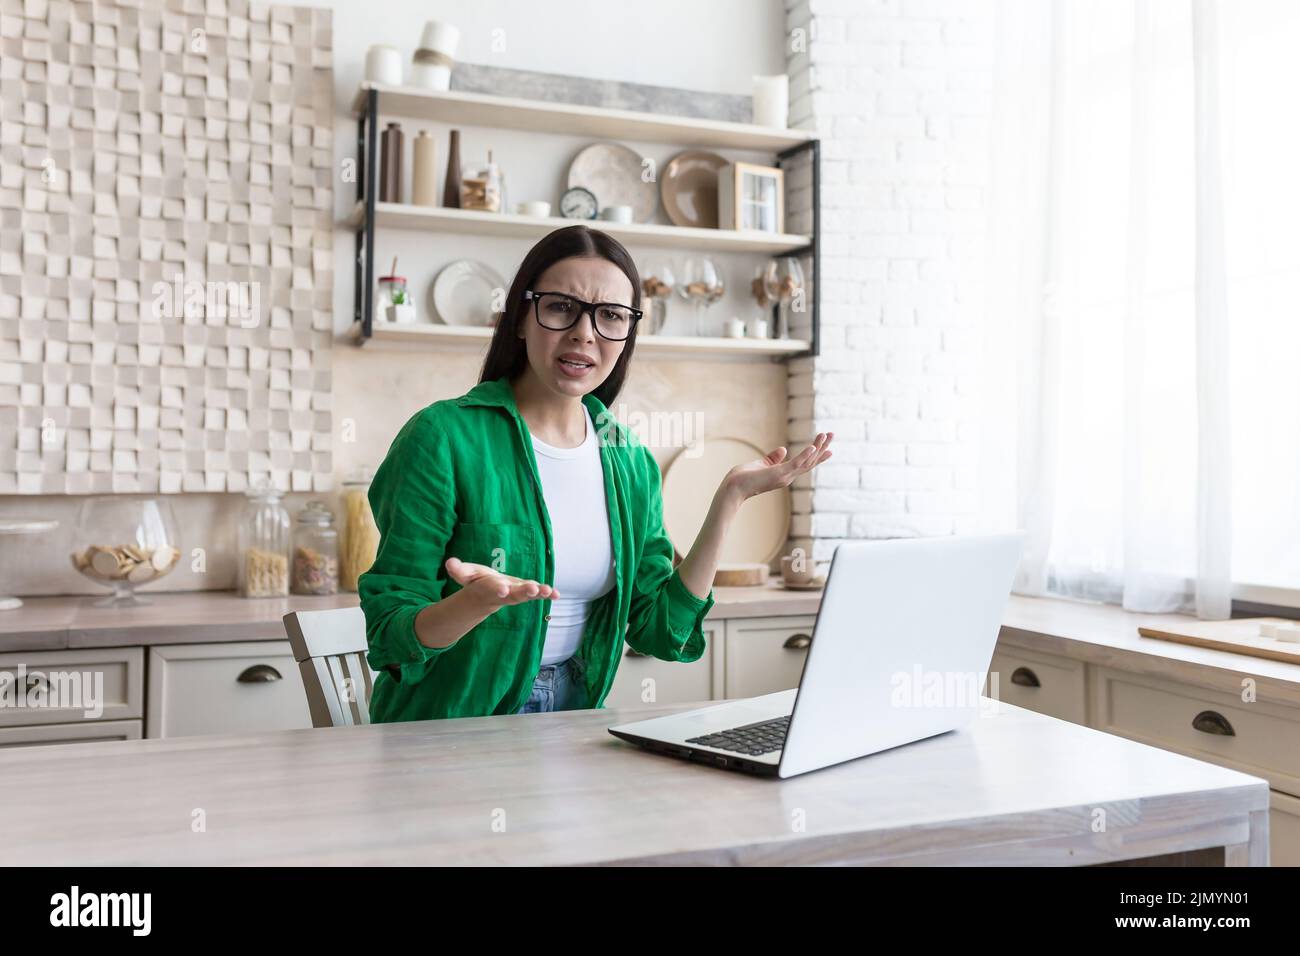 Freelance. Work at home. Confused young beautiful woman in glasses and green clothes, freelancer sitting at a table with a laptop, received bad news, upset, throws up her hands. Stock Photo